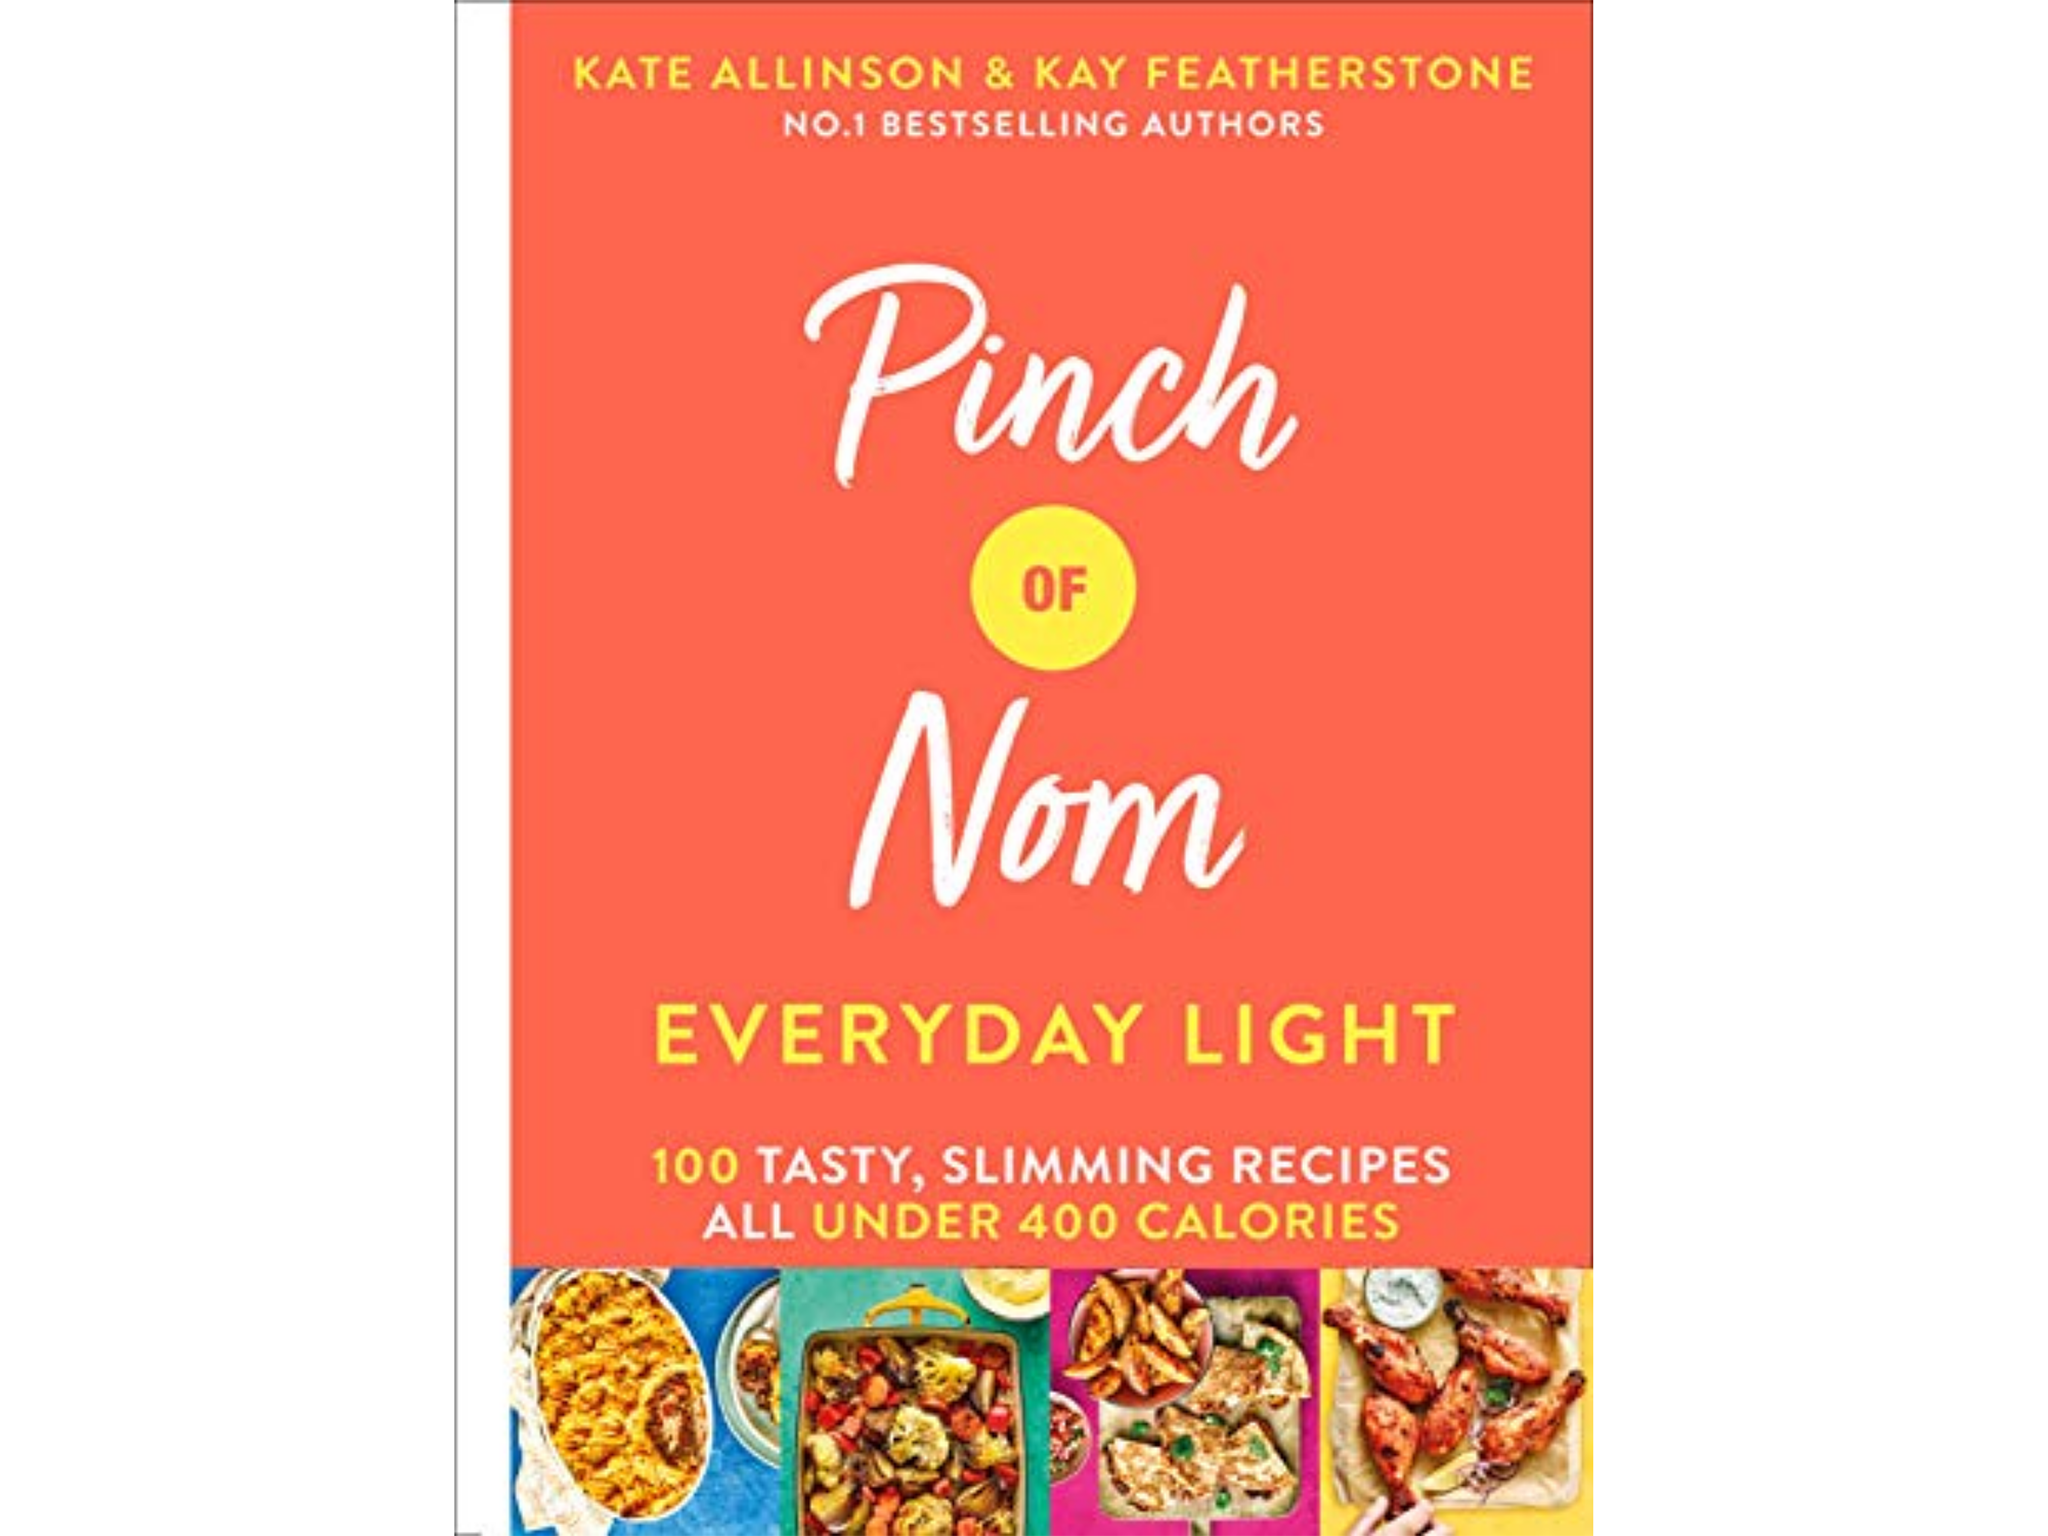 ‘PINCH OF NOM EVERYDAY LIGHT’ BY KATE ALLINSON AND KAY FEATHERSTONE, PUBLISHED BY BLUEBIRD